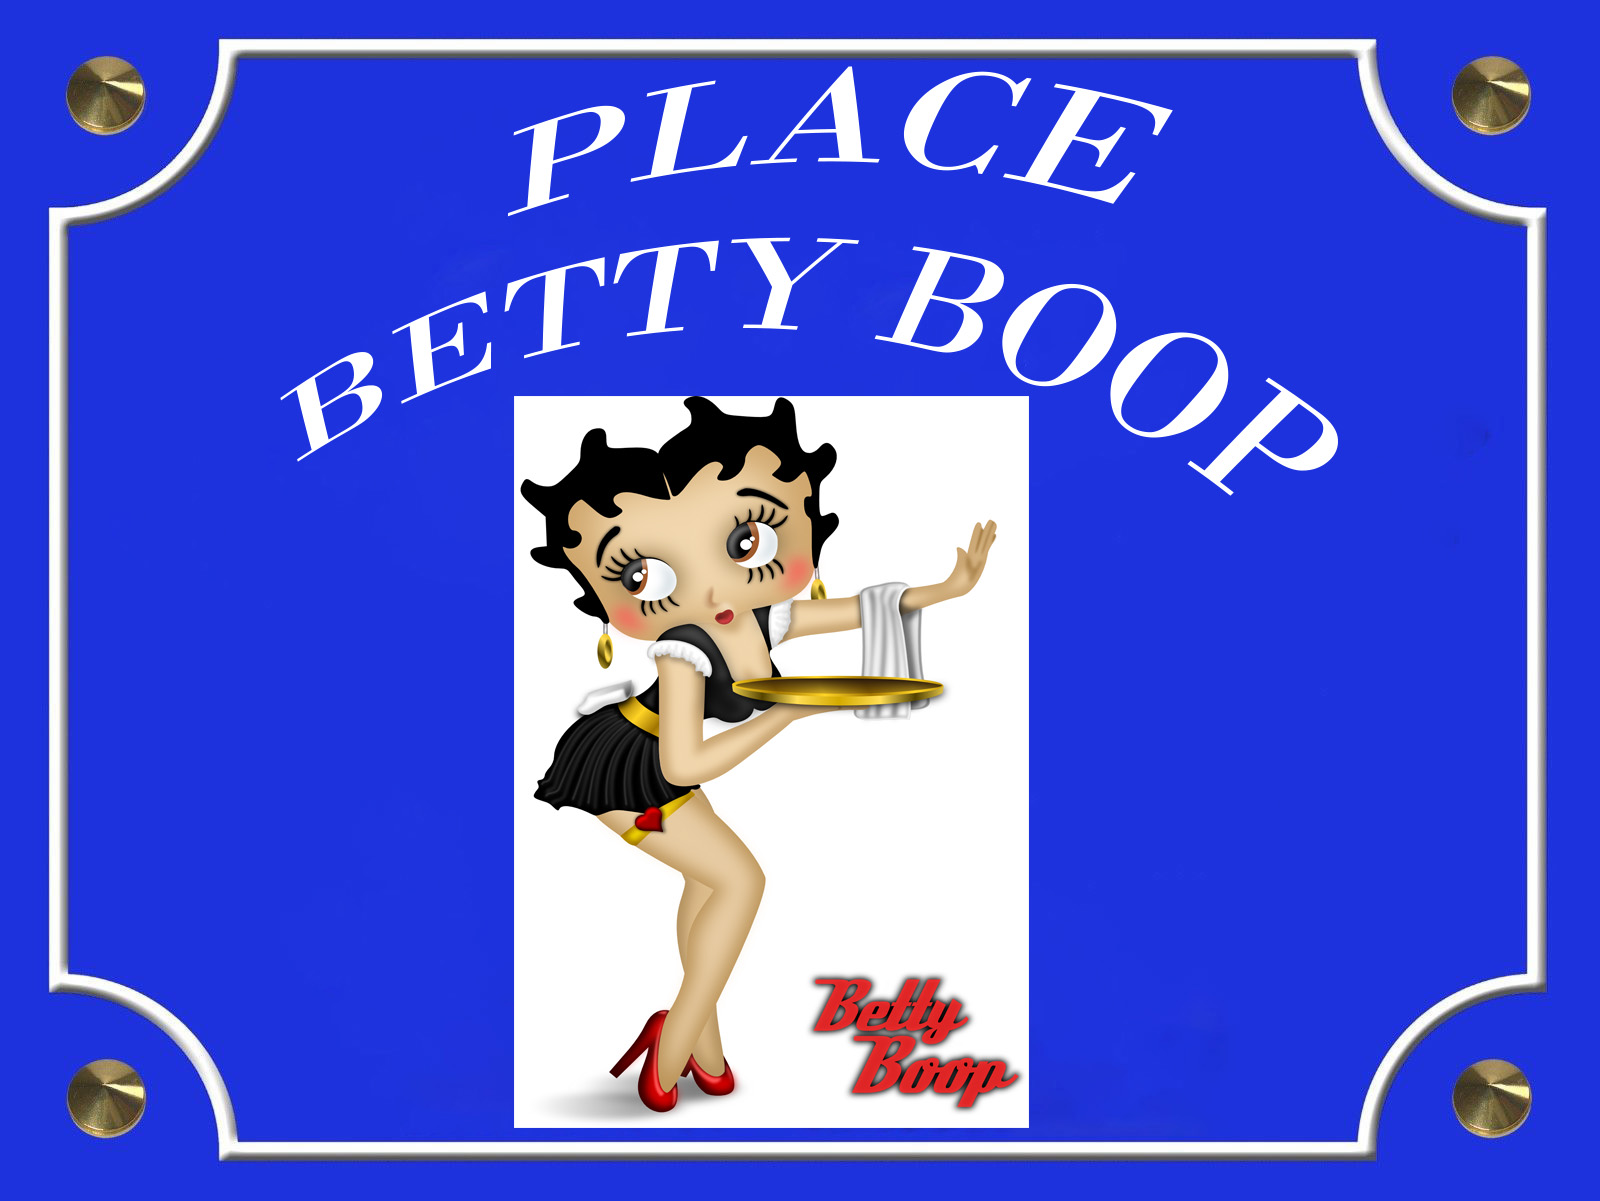 PLACE BETTY BOOP SERVEUSE